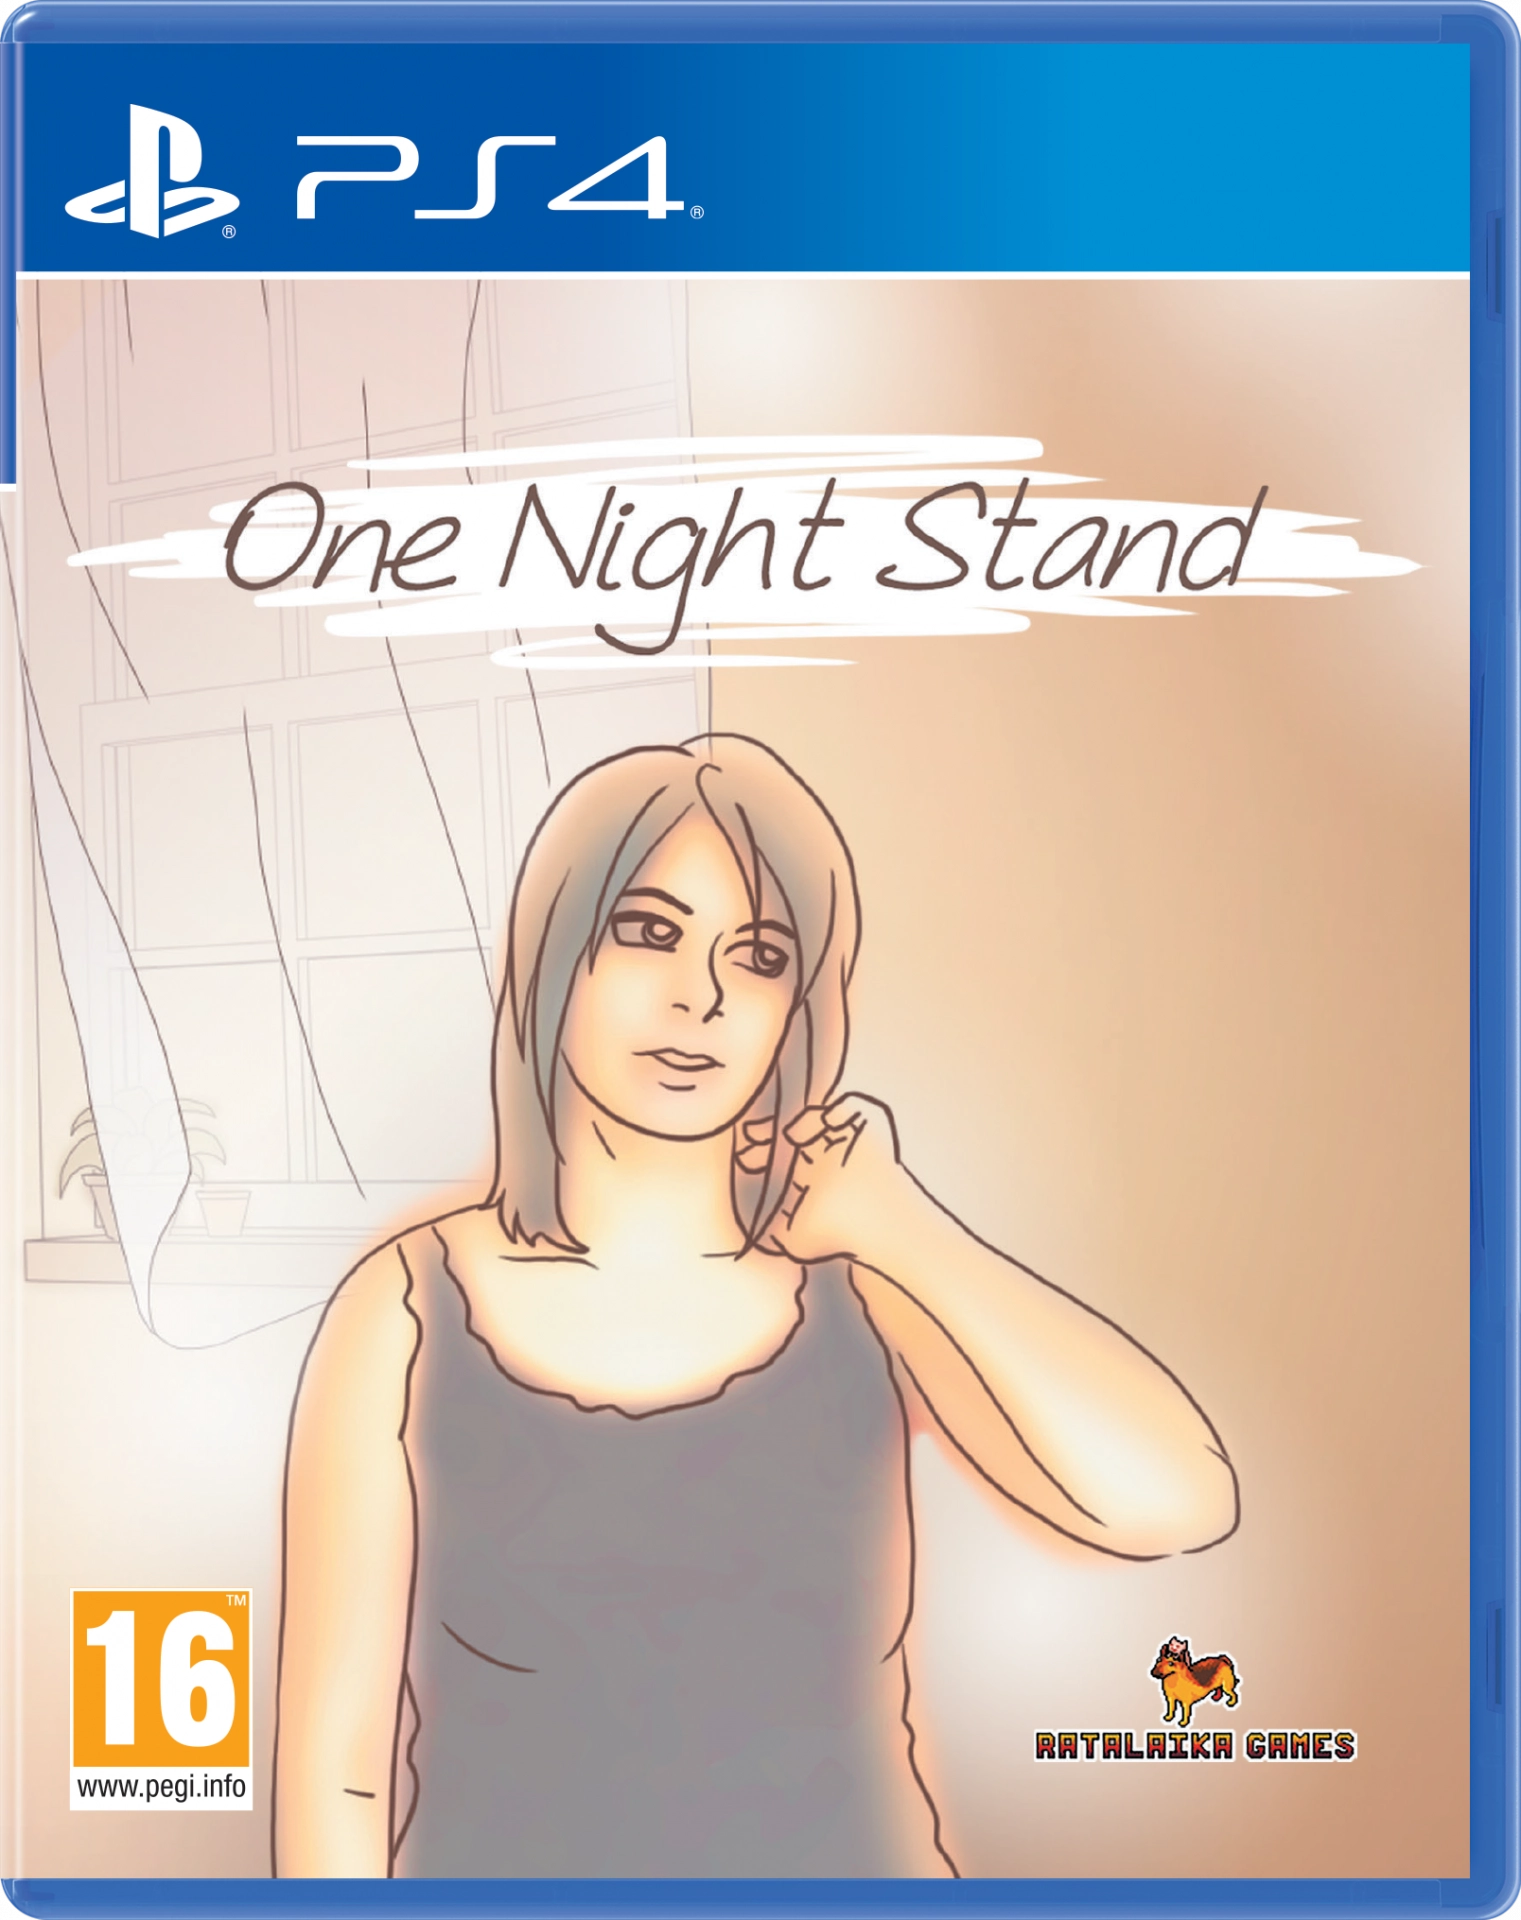 One Night Stand (PS4), Red Art Games